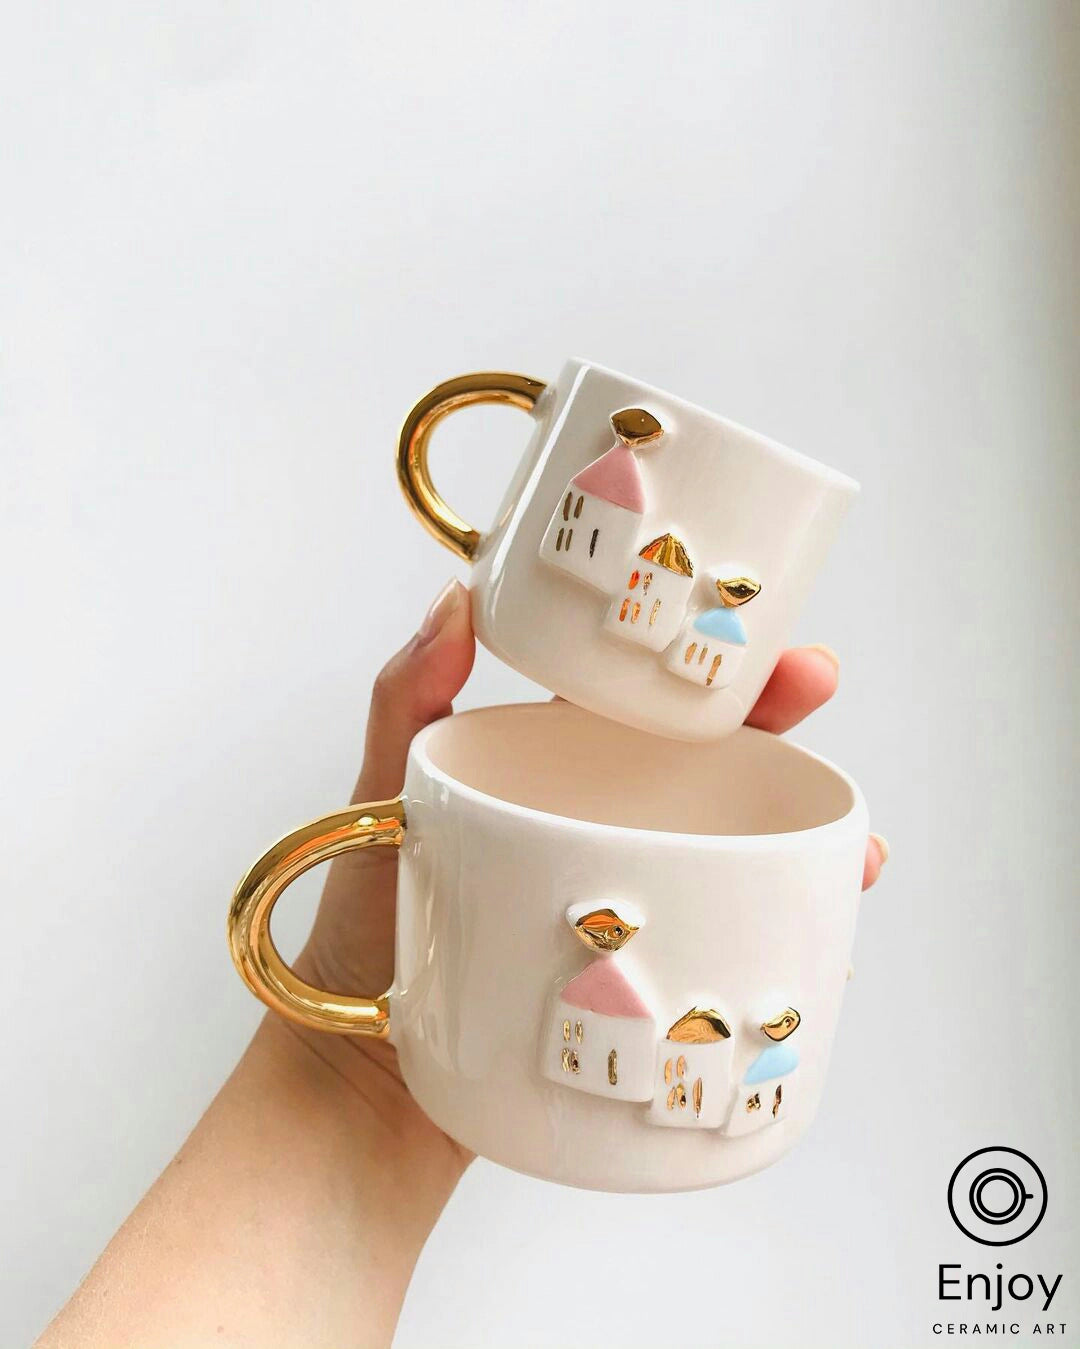 Handmade 'Masal' Little Houses Espresso Cup & Saucer Set - 5.4 oz Ceramic Espresso Mugs with Gold Handle, Perfect Realtor Gift or Housewarming Present